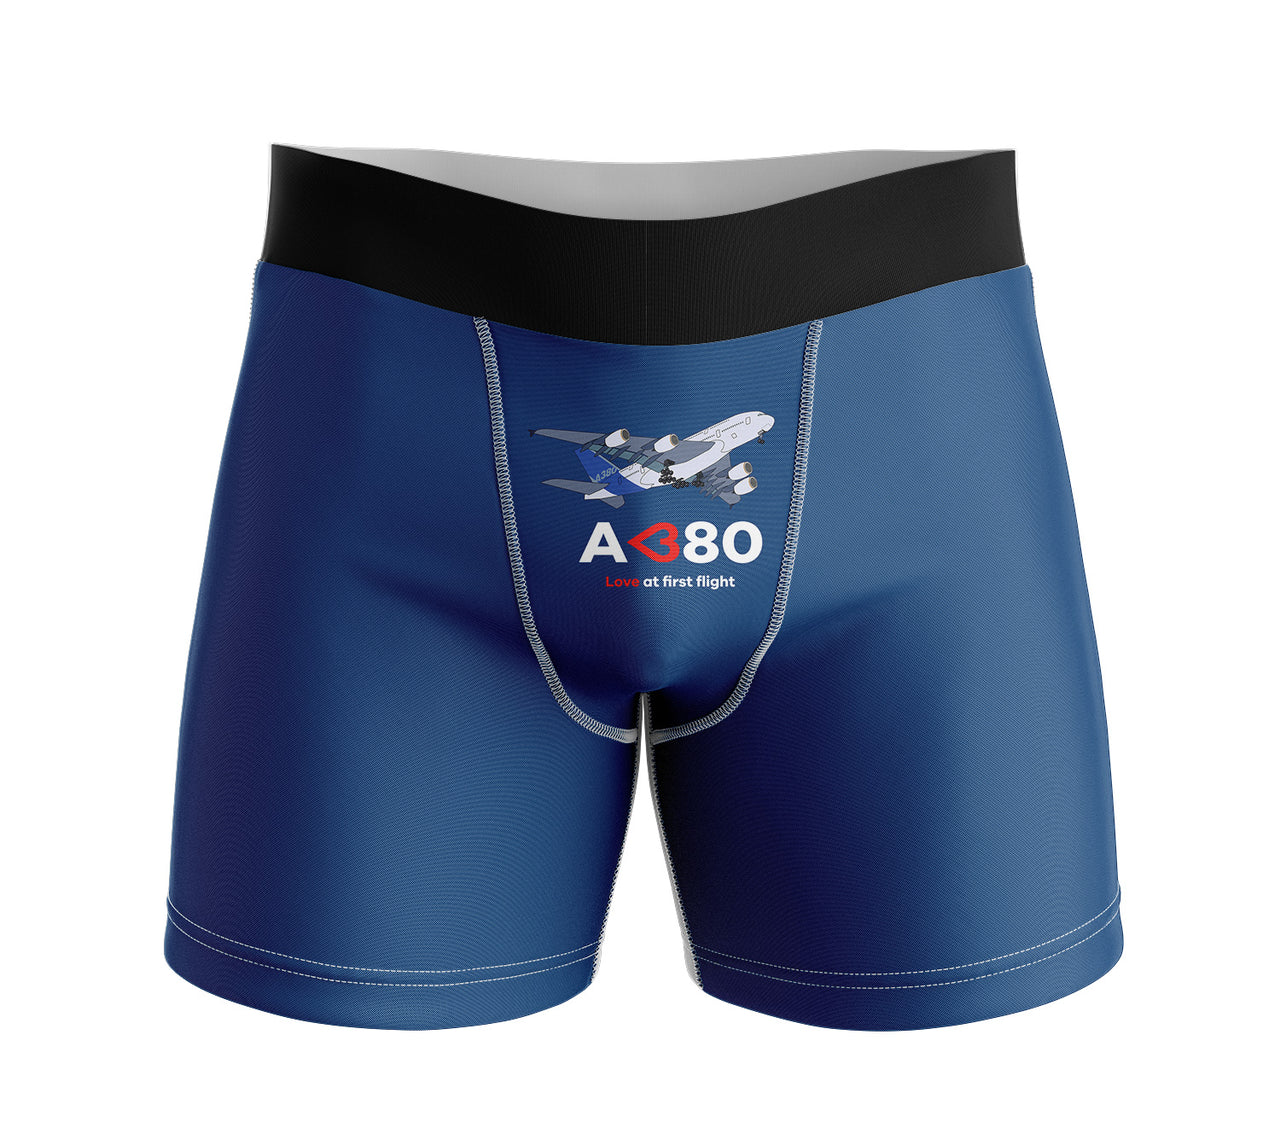 Airbus A380 Love at first flight Designed Men Boxers